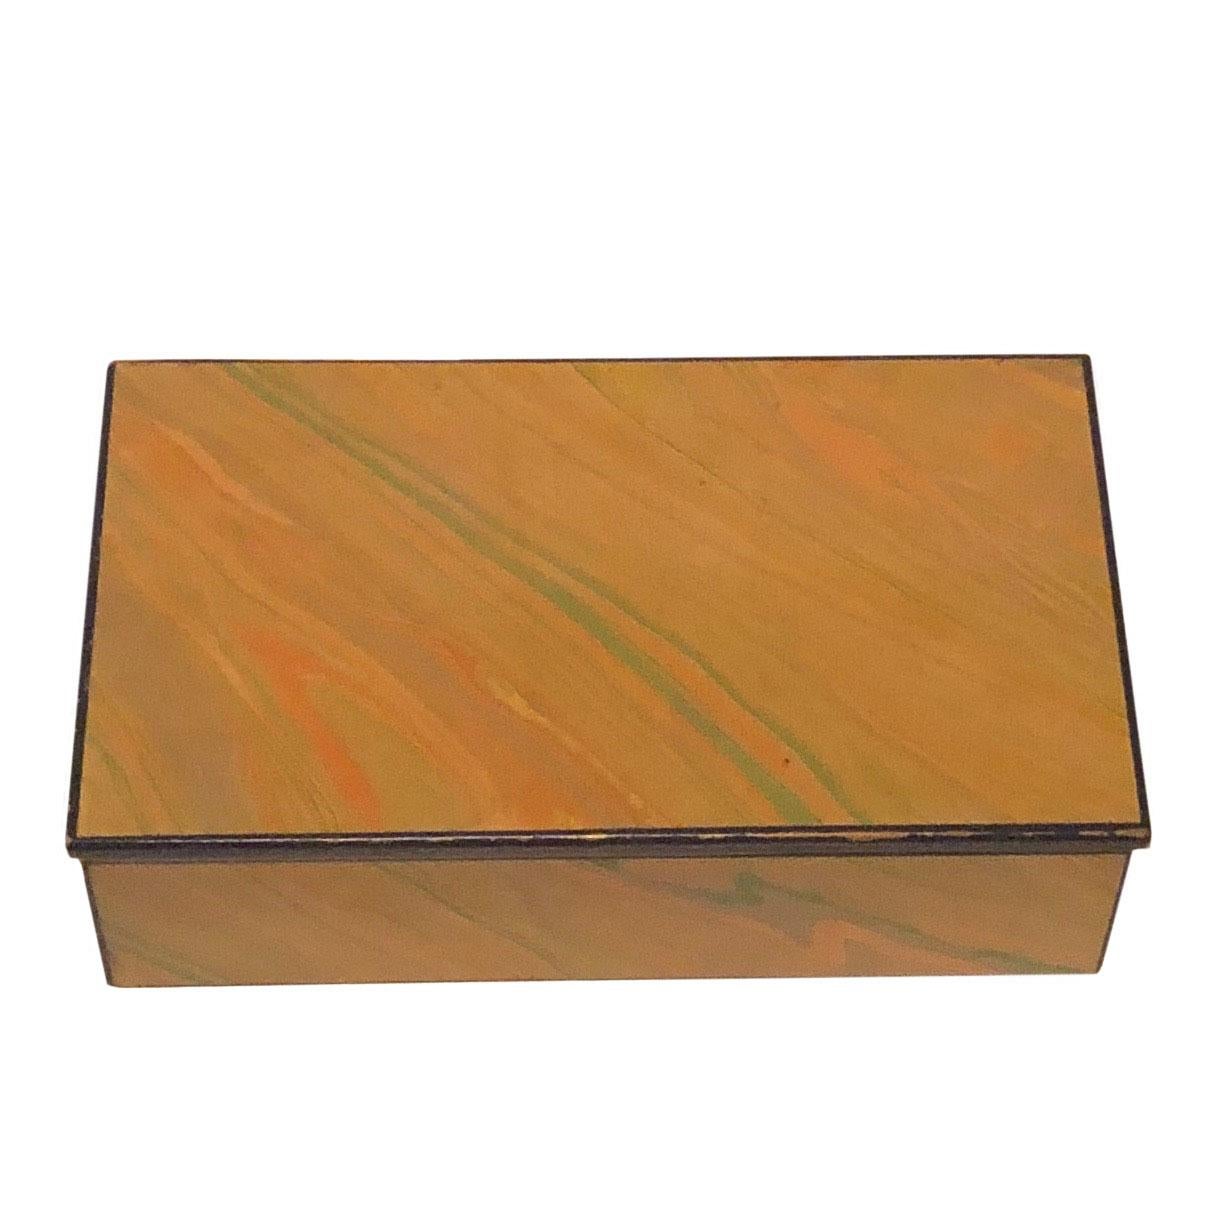 Signed mid-century signed by the artist, Alessandro Albrizzi box made and out of paper and wood. Italy, late 1950’s.